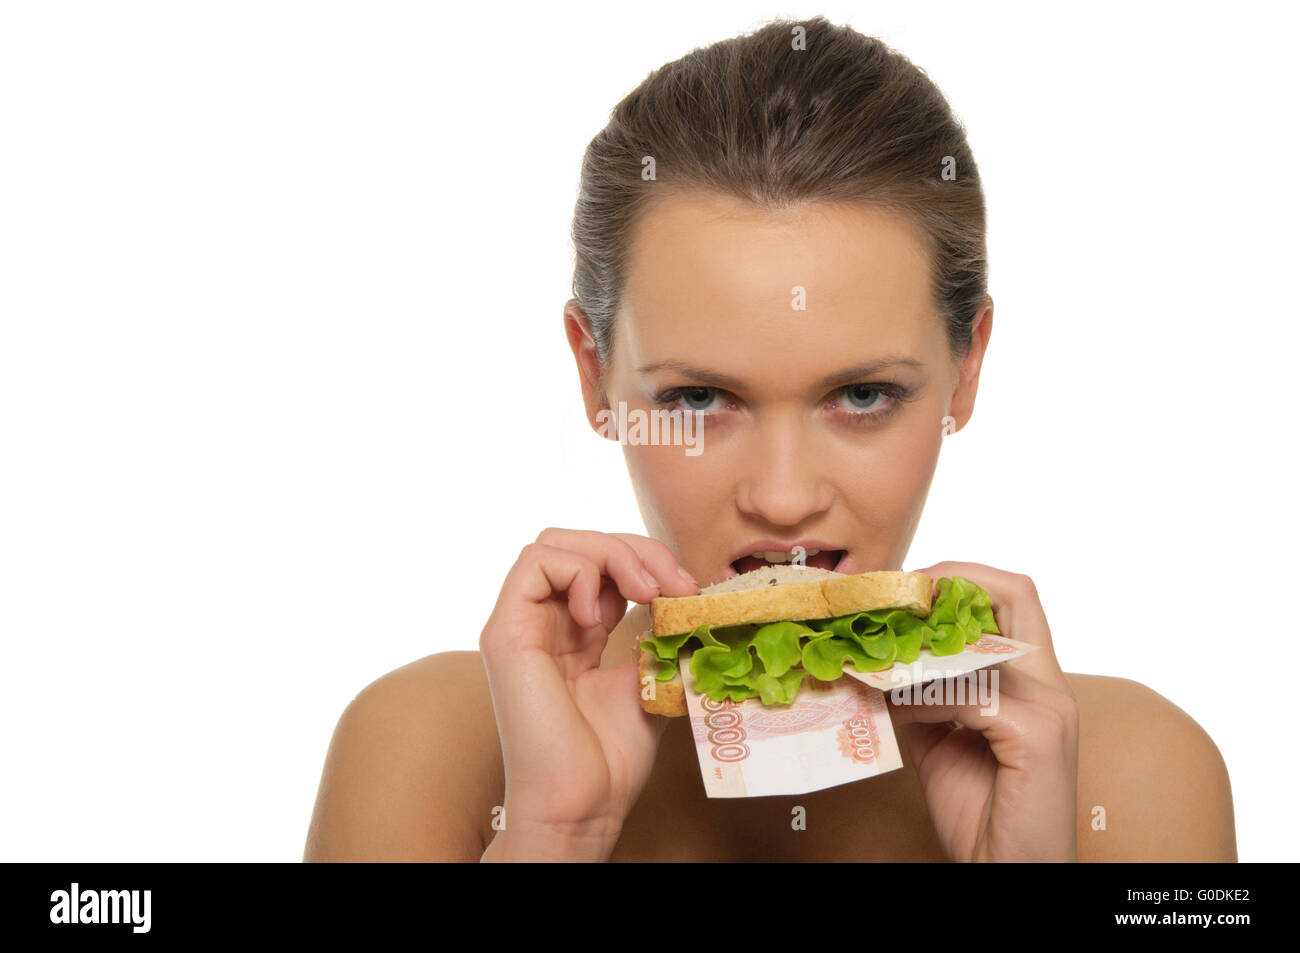 Woman biting a sandwich out of money and lettuce Stock Photo